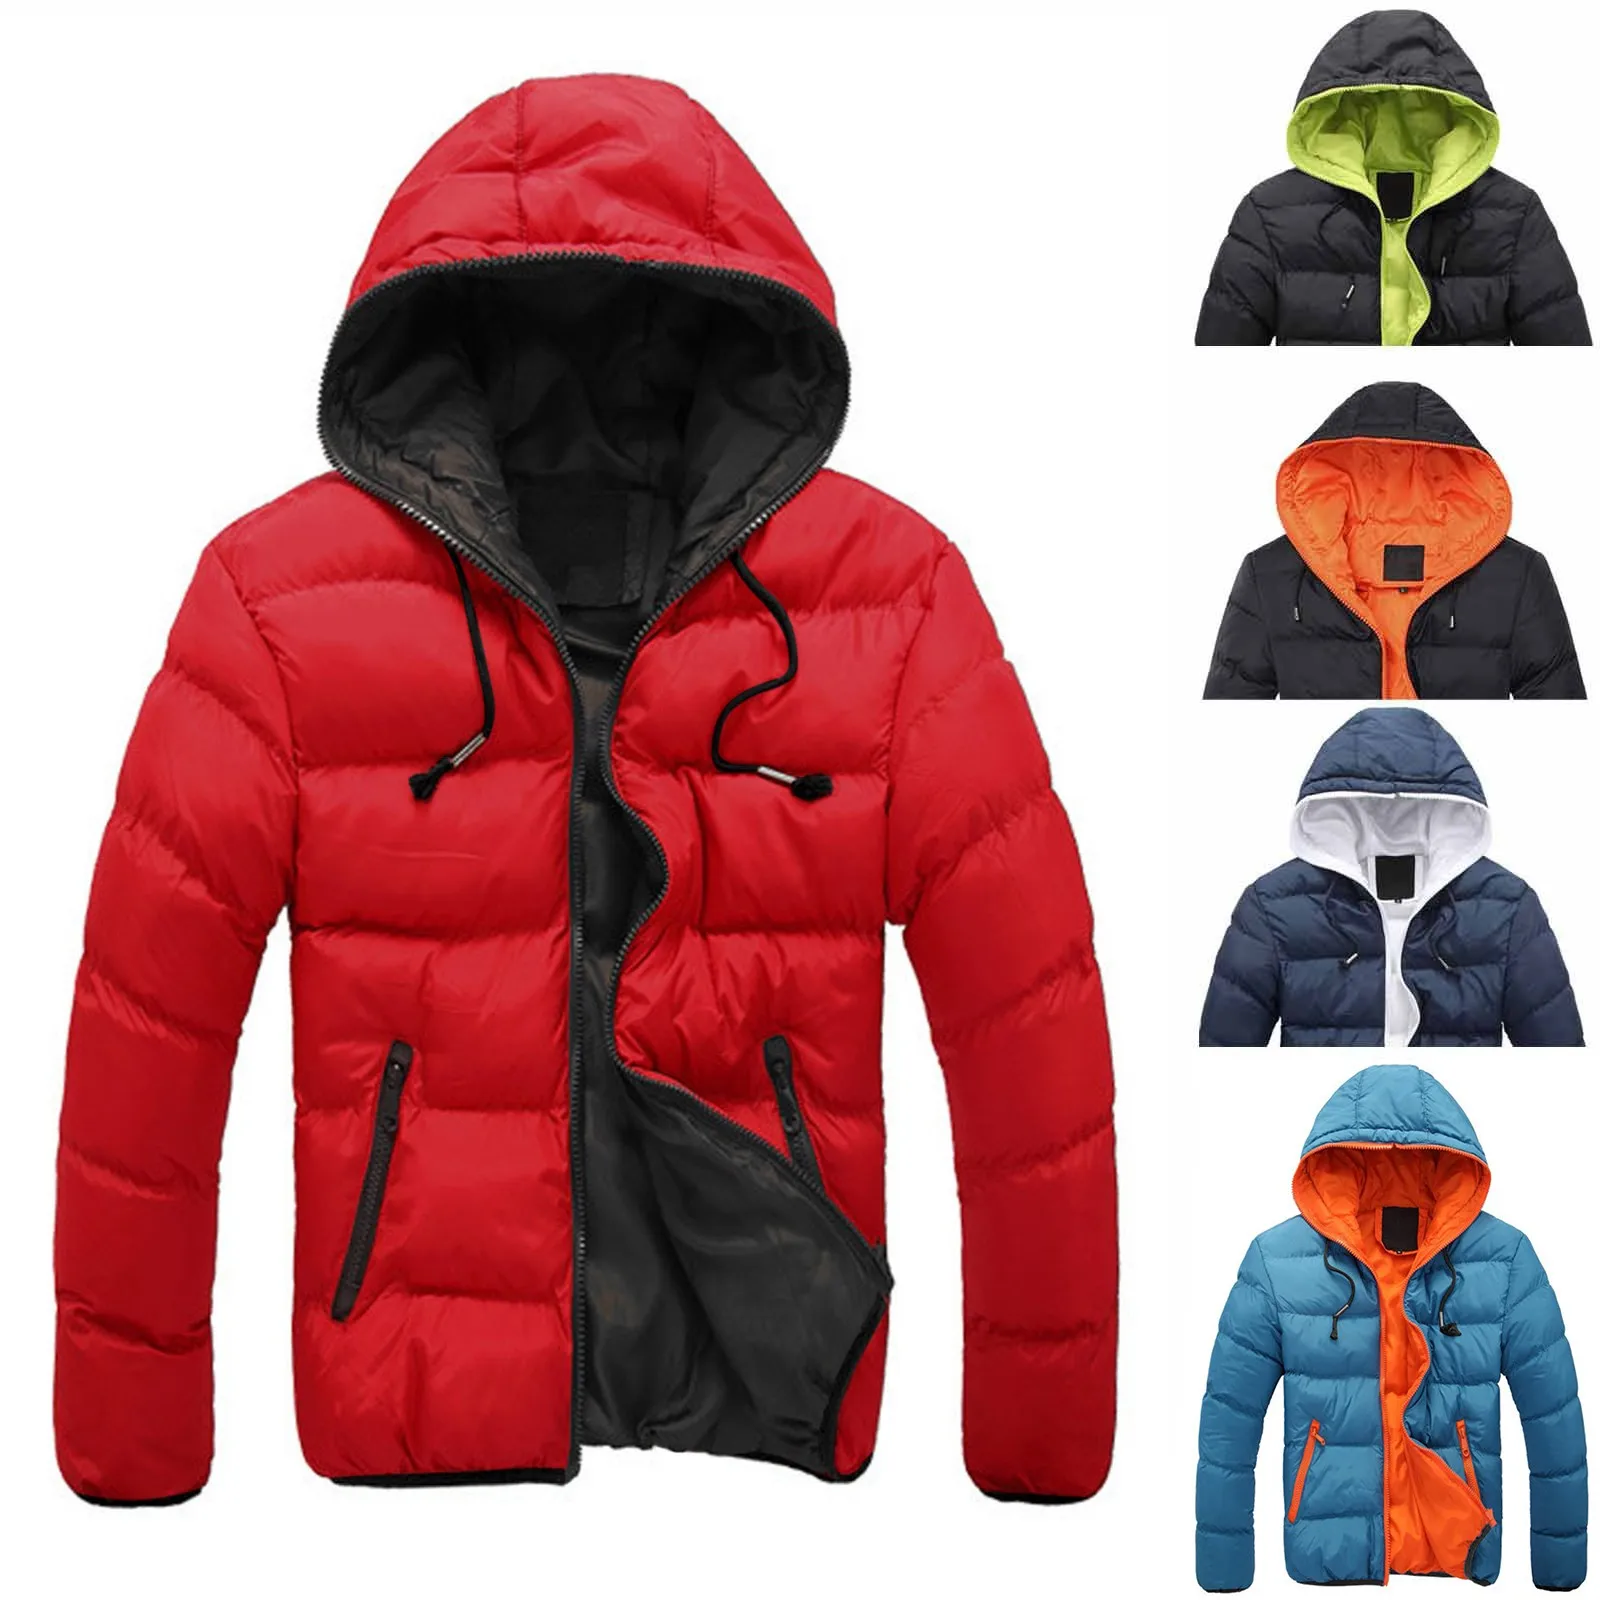 

Men's Winter Casual Color Collision Coat Zipper Hoodie Cotton-padded Jacket Cycling Windbreaker Slim Fit Coat Thick Clothing